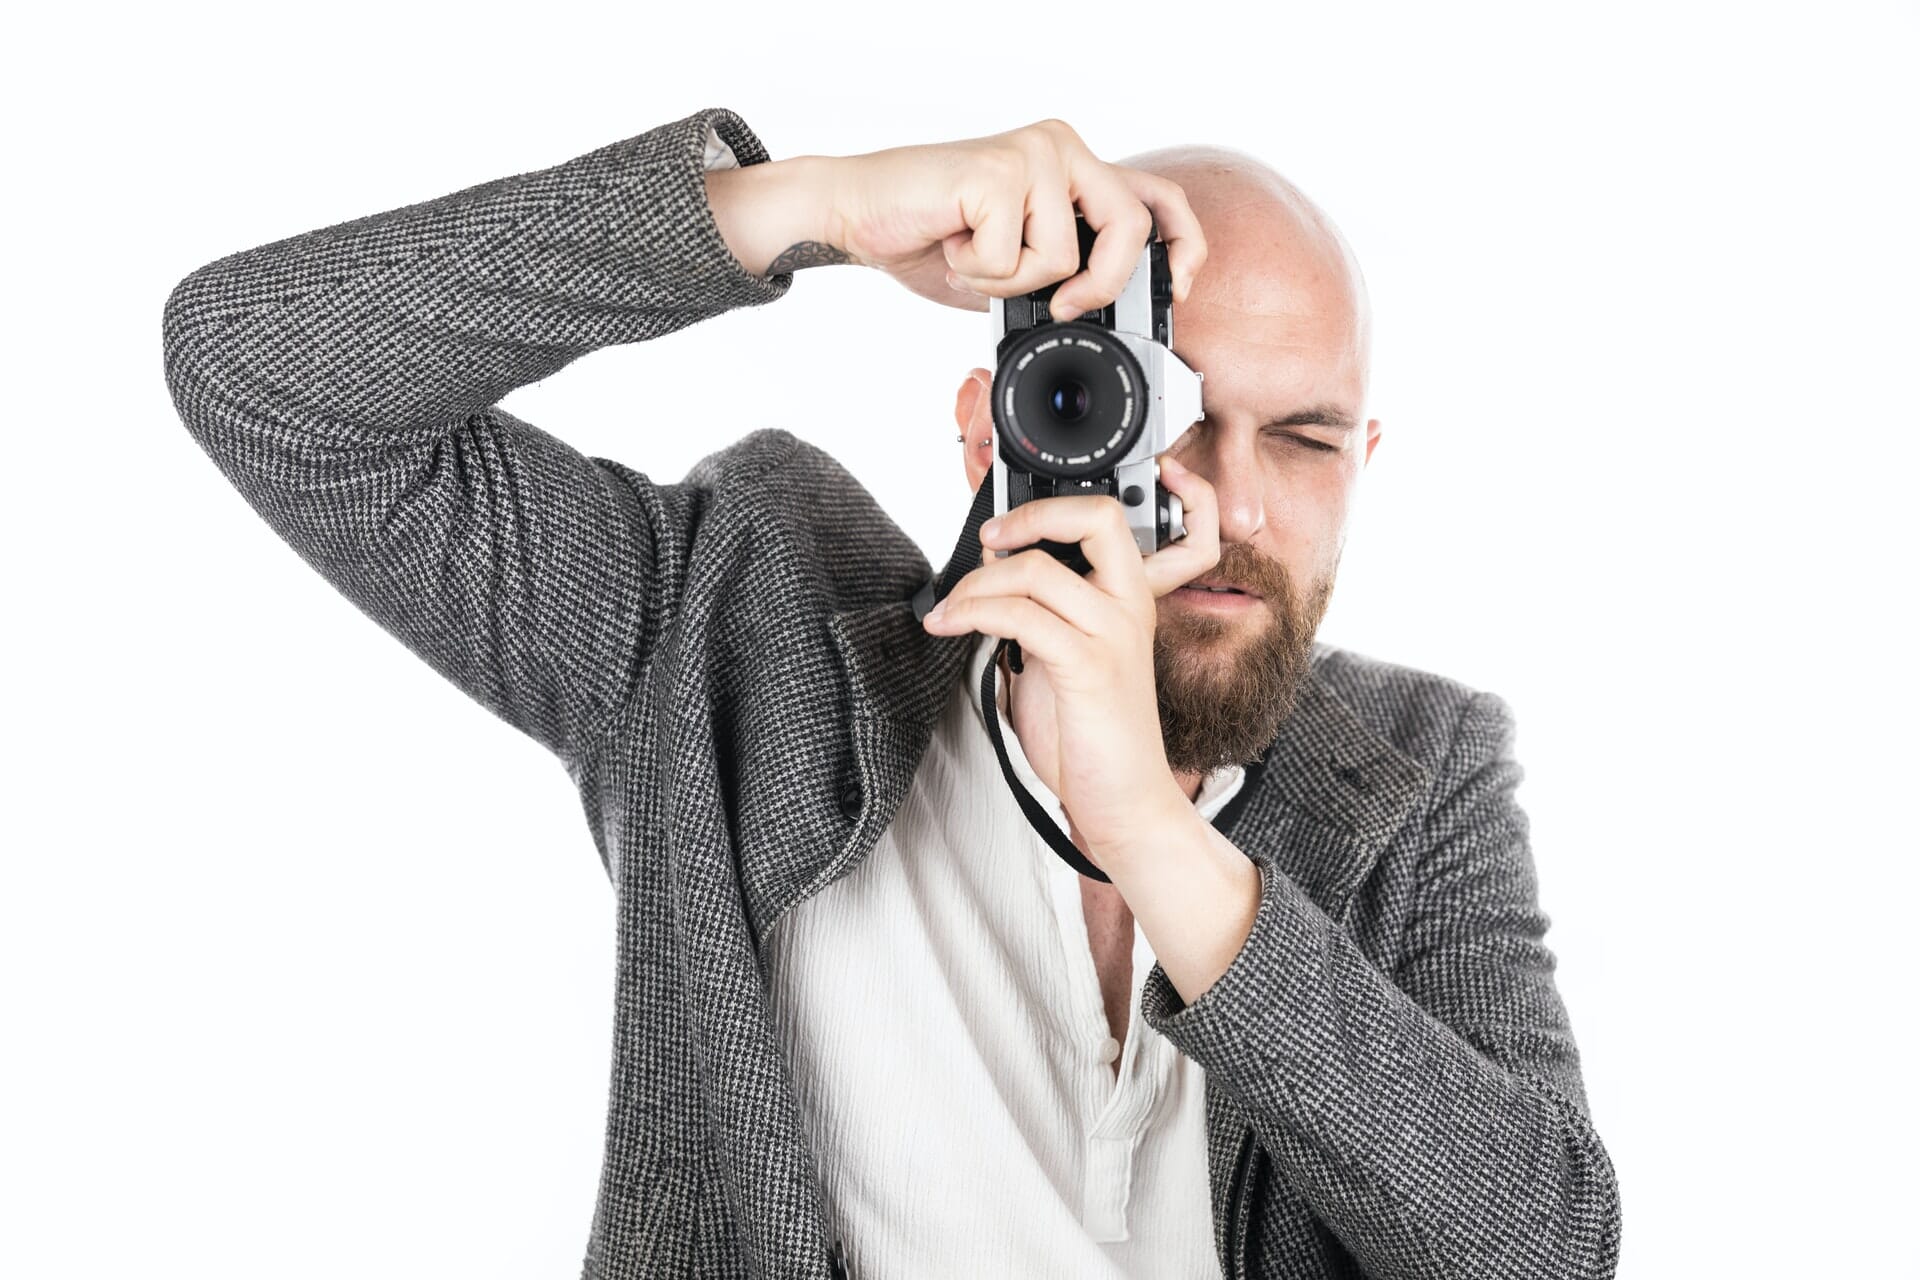 Man holding a camera up to his eye, taking a photograph.